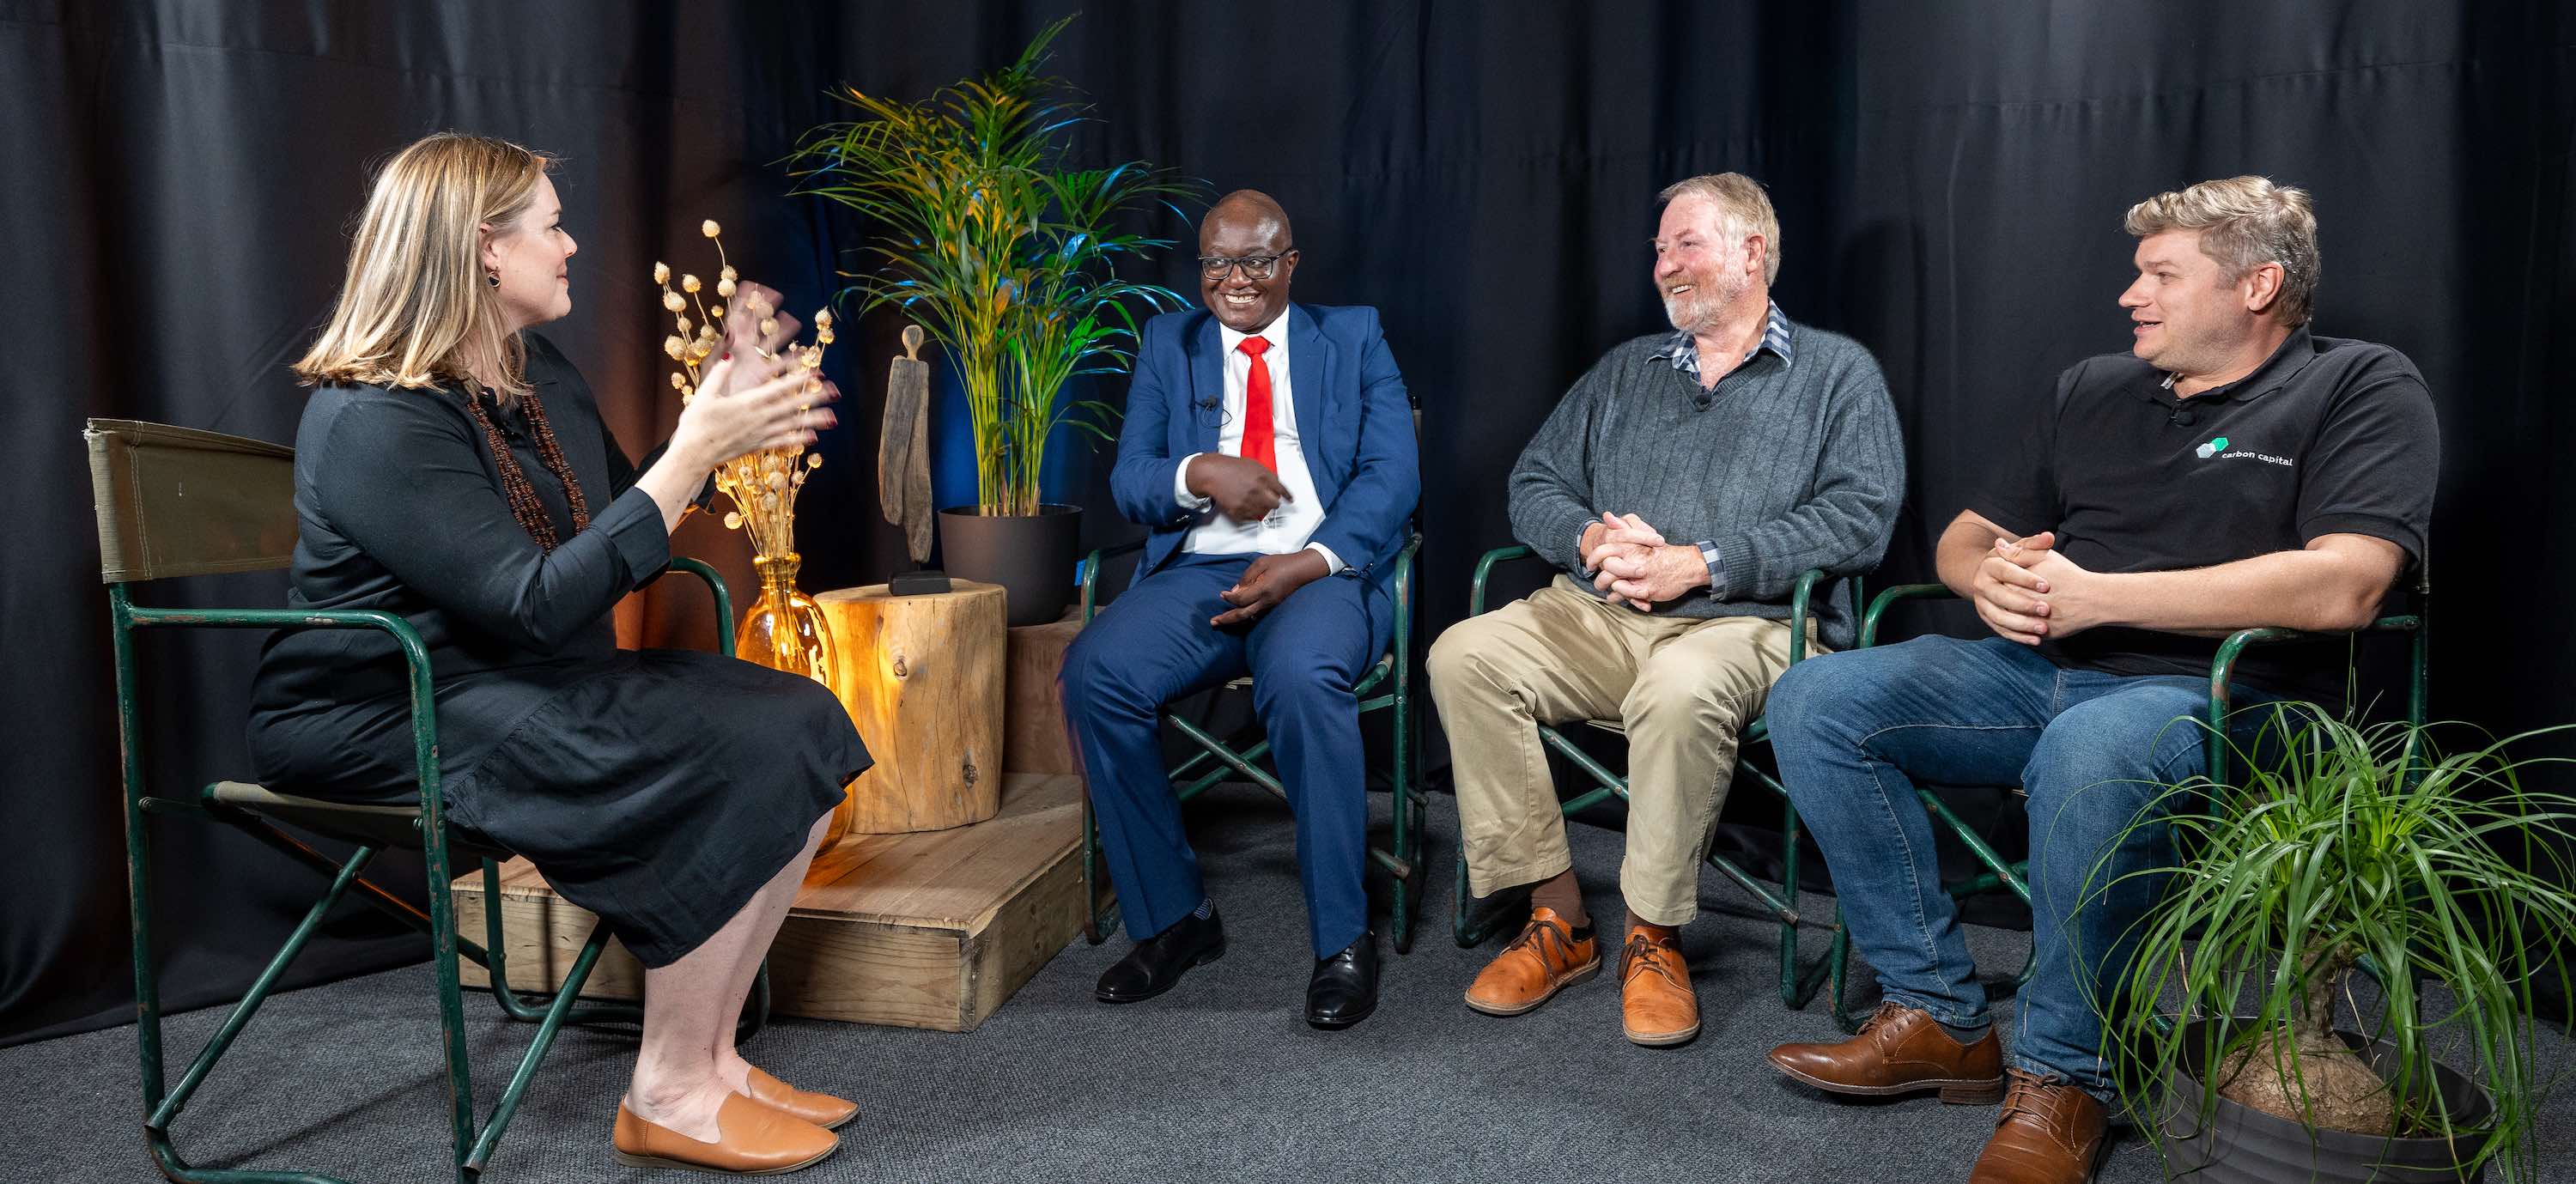 A panel discussion - a woman interviews three men.